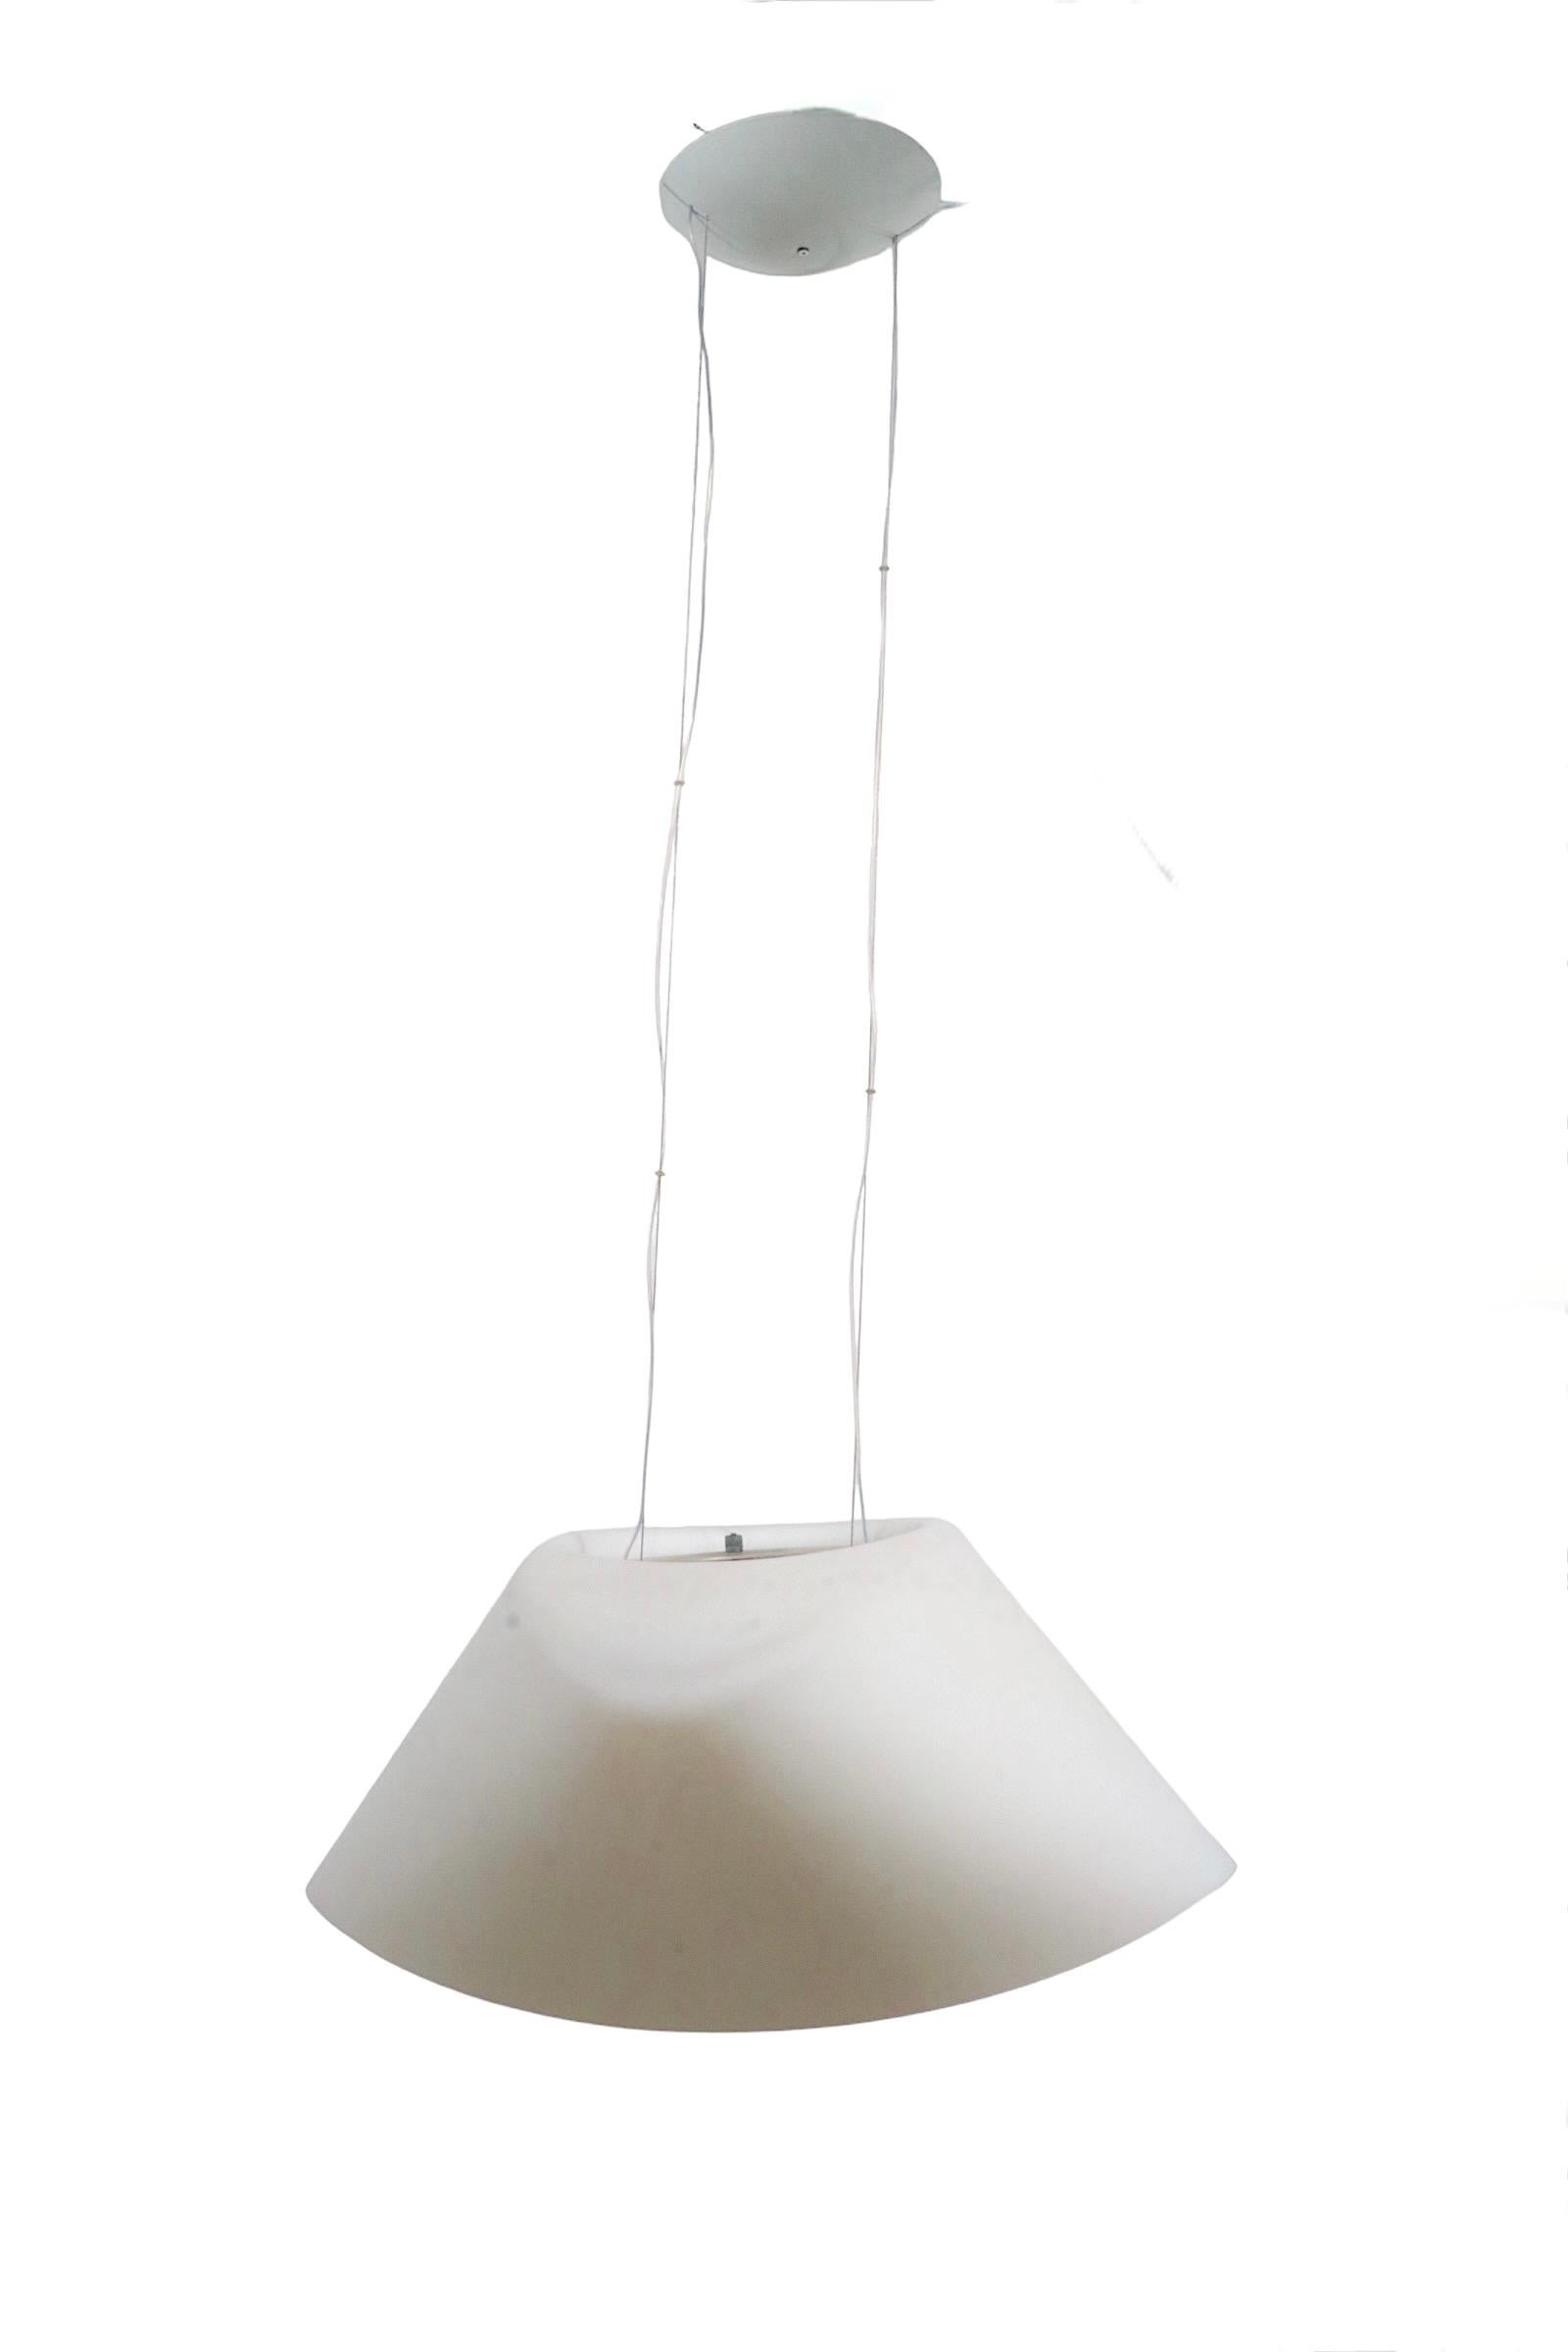 Asymmetrical Satin Glass Post Modern Light Fixture Made in Italy by Foscarini For Sale 4